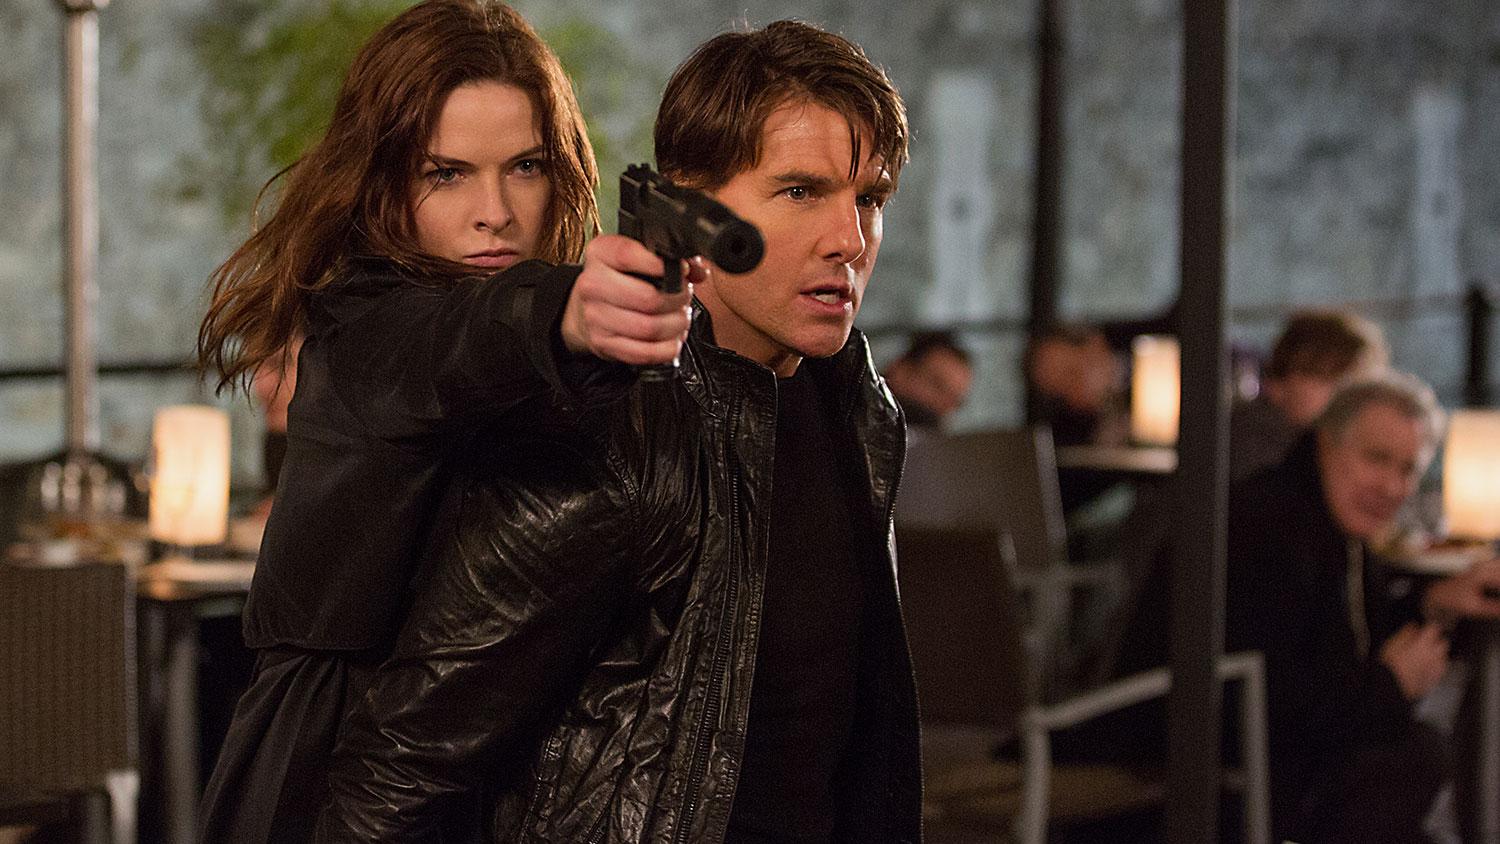 Rebecca Ferguson and Tom Cruise in Mission: Impossible Rogue Nation.